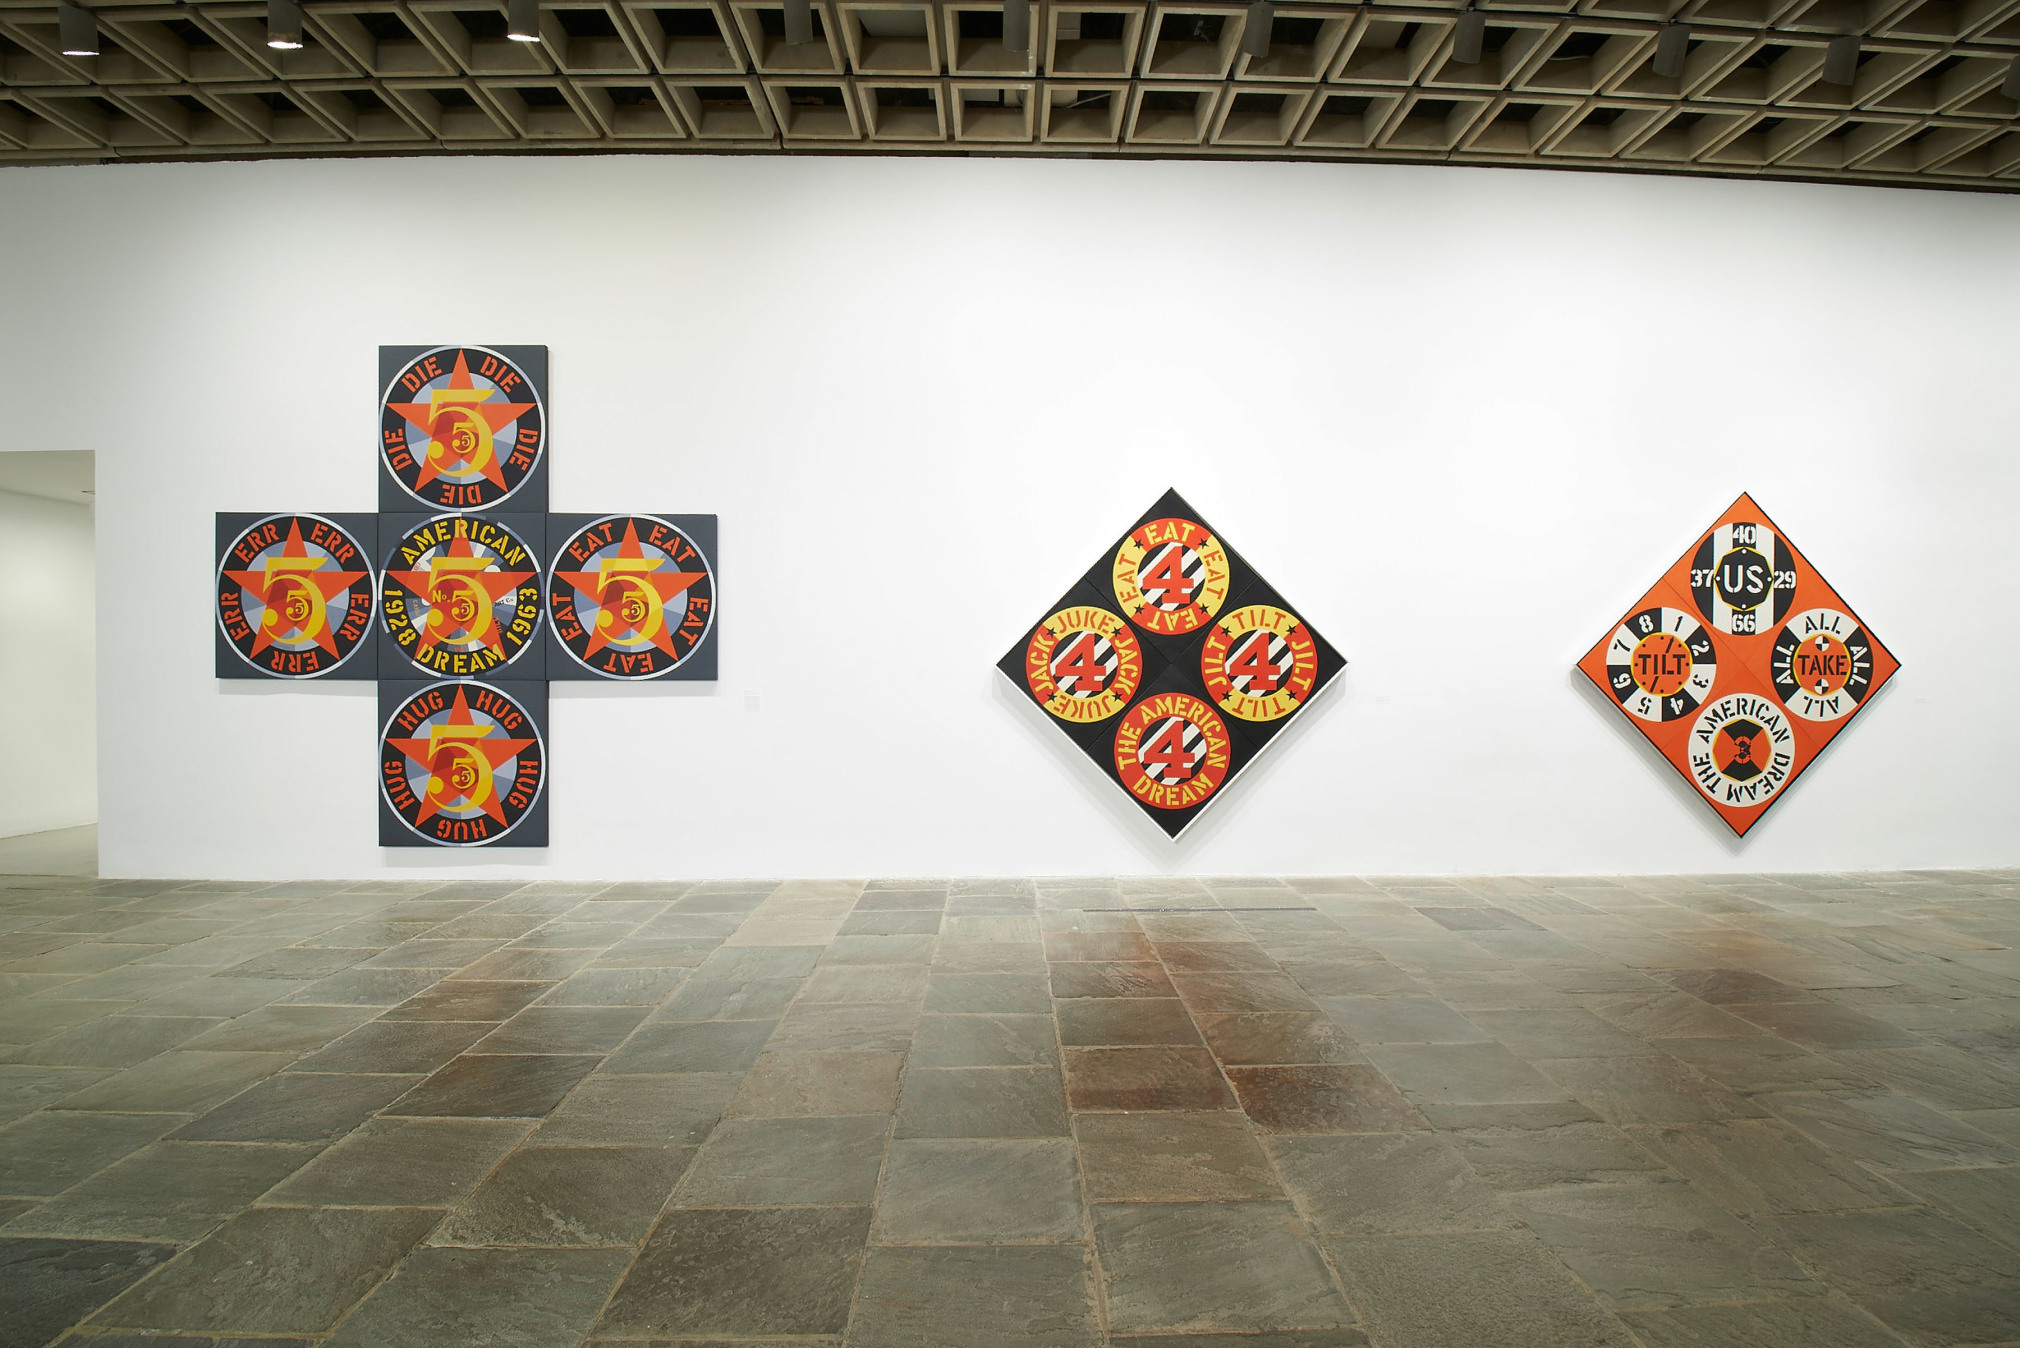 Installation view of Robert Indiana: Beyond LOVE, Whitney Museum of American Art, New York, September 26, 2013&ndash;January 5, 2014. Left to right, The Demuth American Dream No. 5 (1963), The Beware-Danger American Dream #4 (1963), and The Red Diamond American Dream #3 (1962). Photo: Tom Powel Imaging; Artwork: &copy; Morgan Art Foundation Ltd./Artists Rights Society (ARS), NY